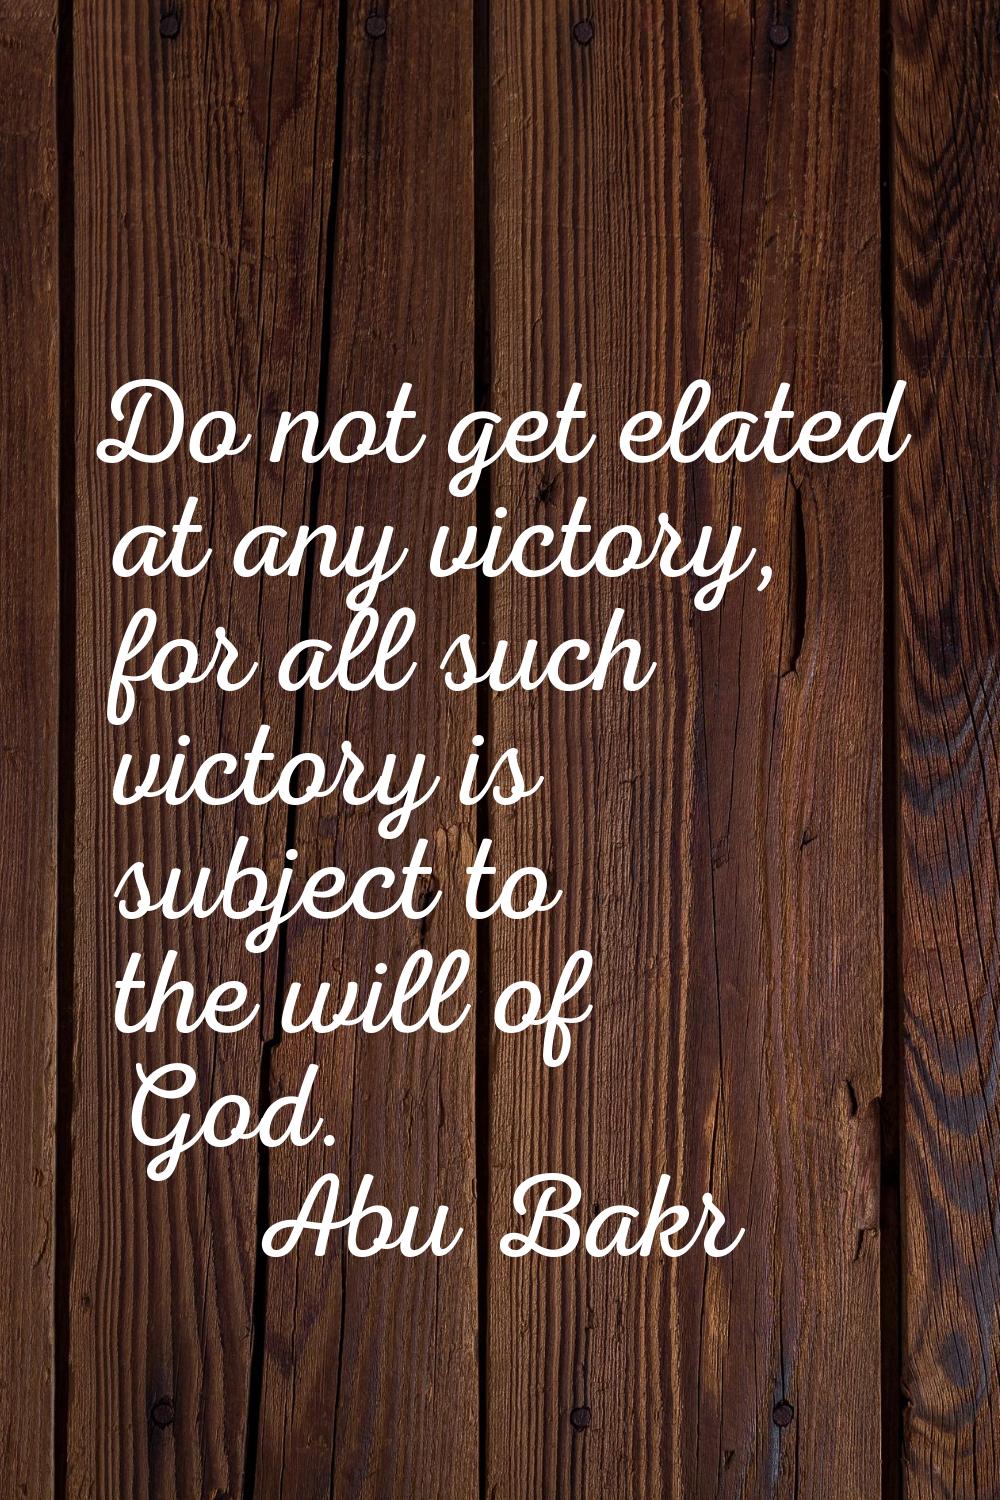 Do not get elated at any victory, for all such victory is subject to the will of God.